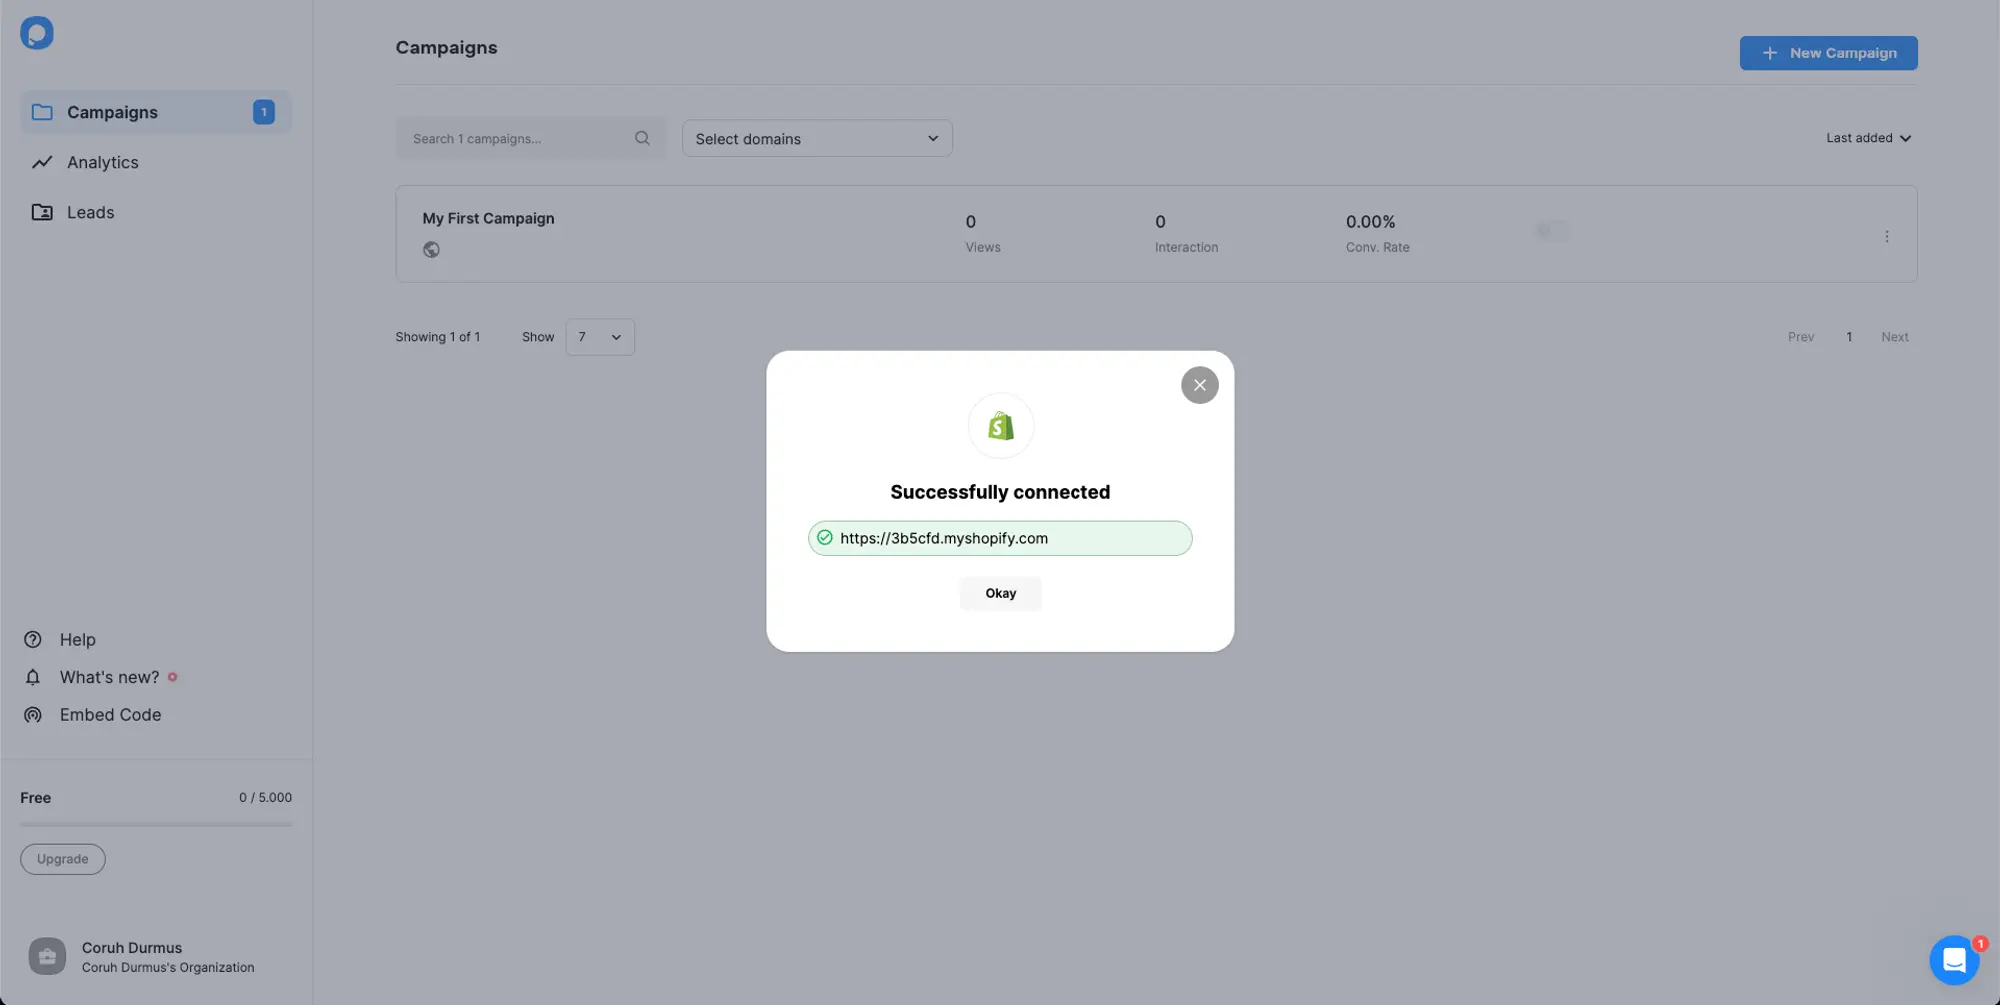 Your shopify account successfully connected